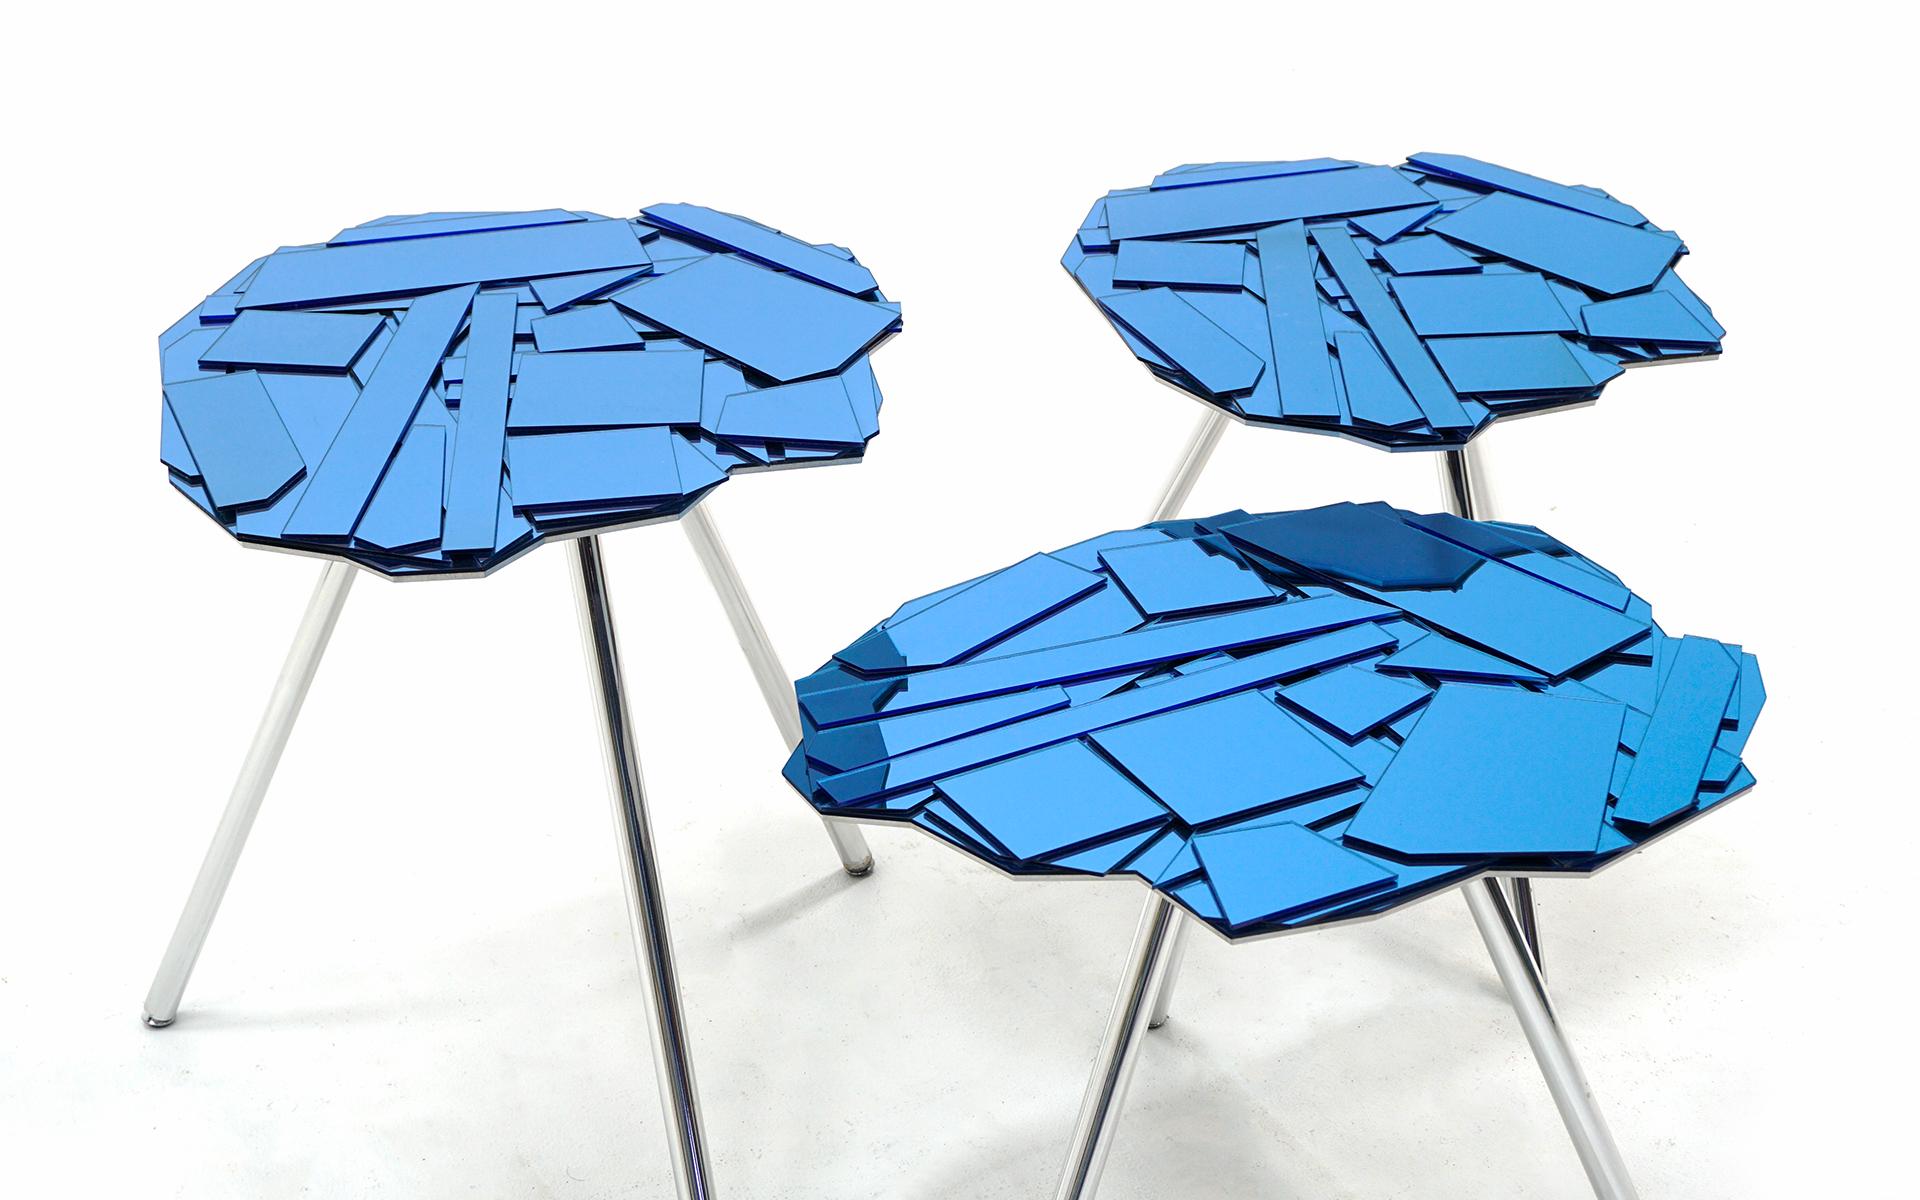 Set of three Brasilia tables designed by Fernando and Humberto Campana for Edra, Italy, 2006. Blue colored mirrored Reflex glass tops and chrome-plated aluminum legs. The glass shards are mounted to a laser cut aluminum plate. No chips or